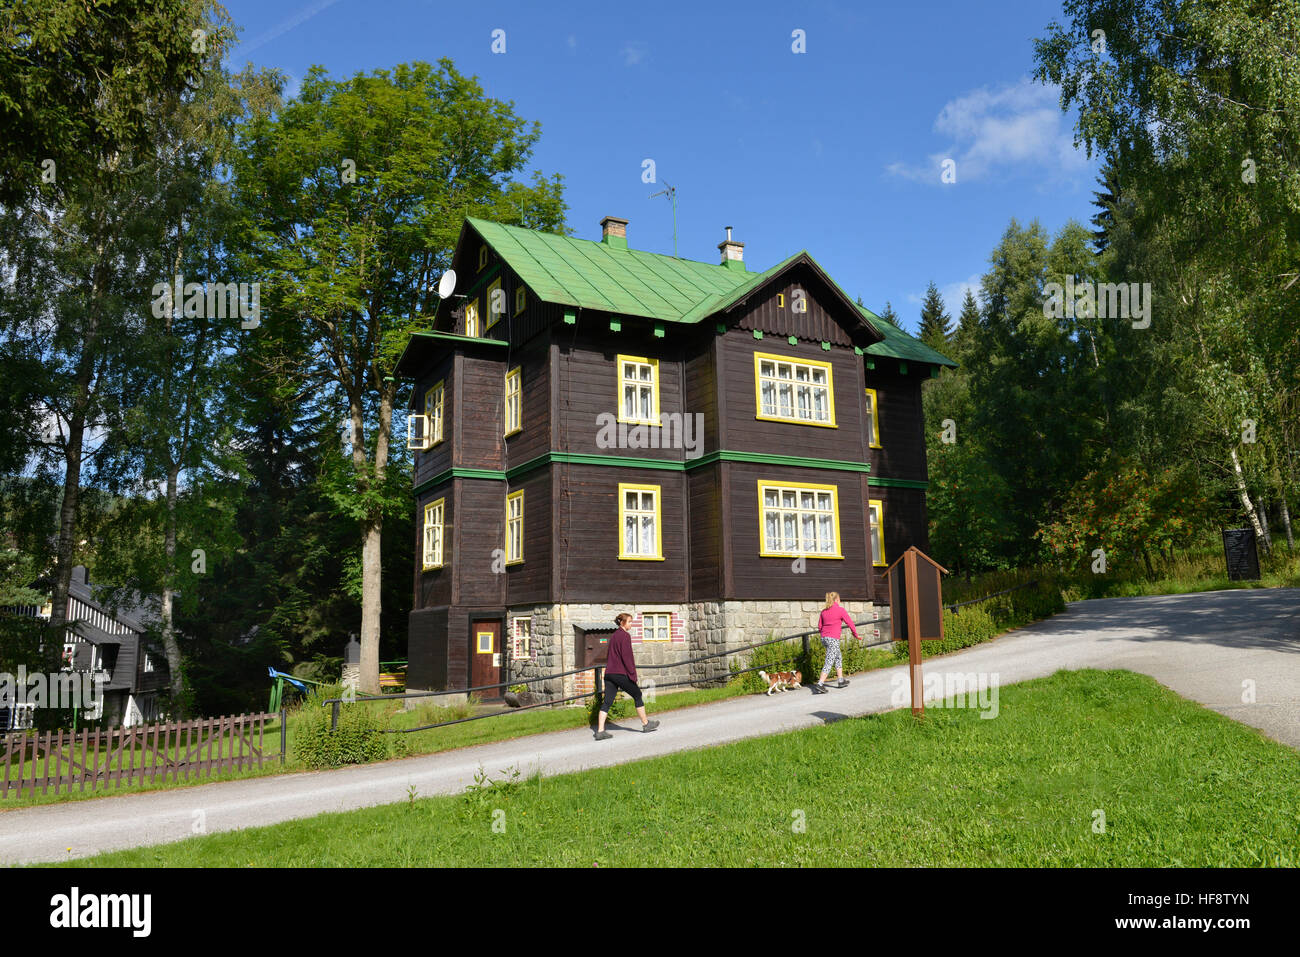 Holzhaus, Spindlersmuehle, Tschechien, Timber house, wooden spindle maker's mill, Czechia Stock Photo